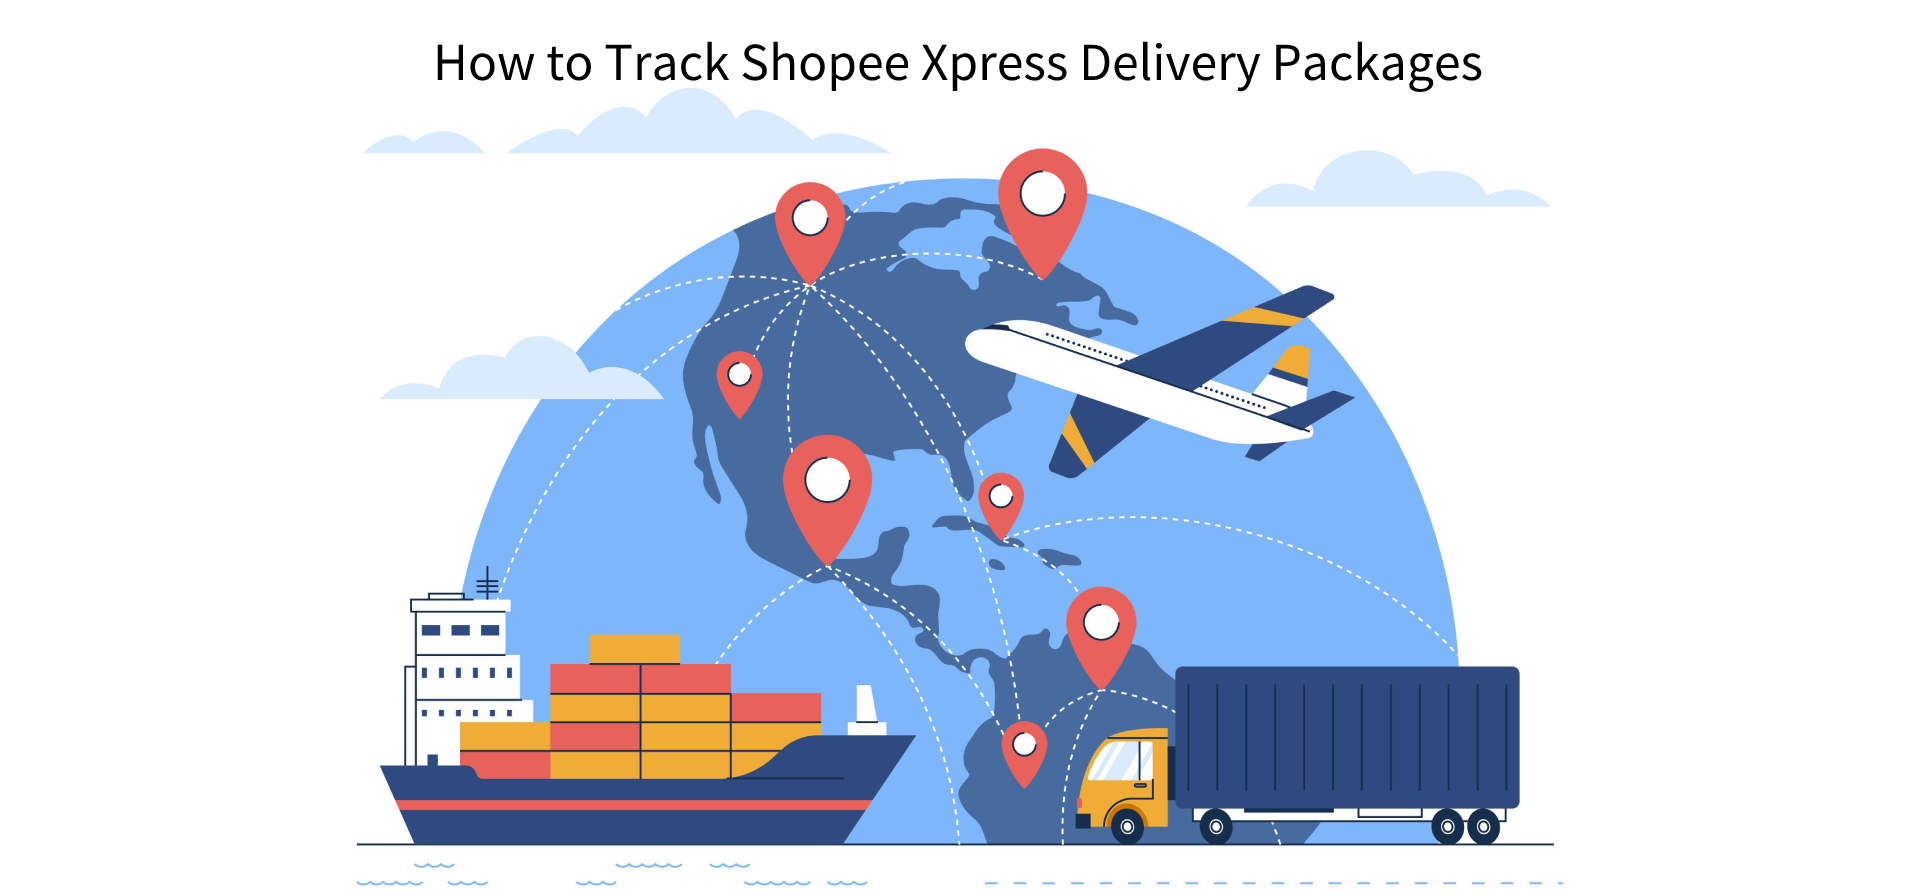 How to Track Shopee Xpress Delivery Packages